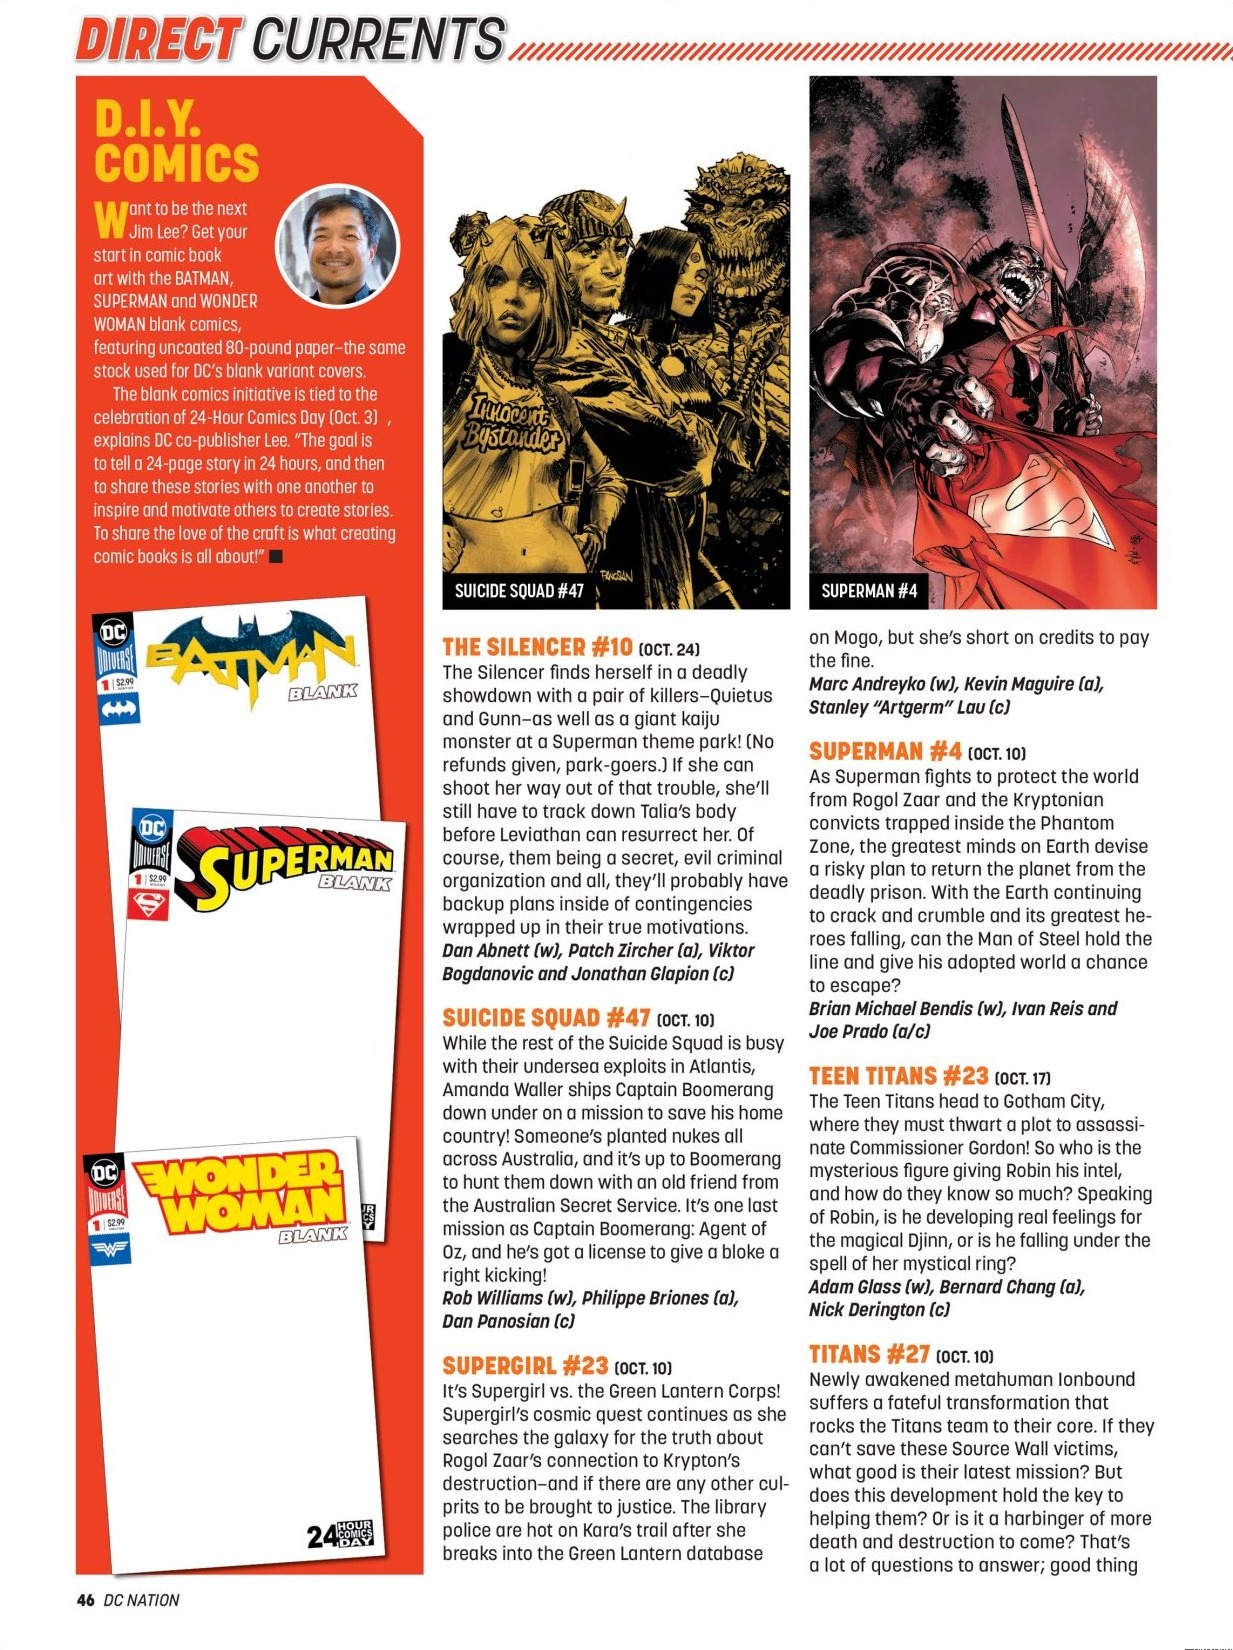 Read online DC Nation comic -  Issue #4 - 39